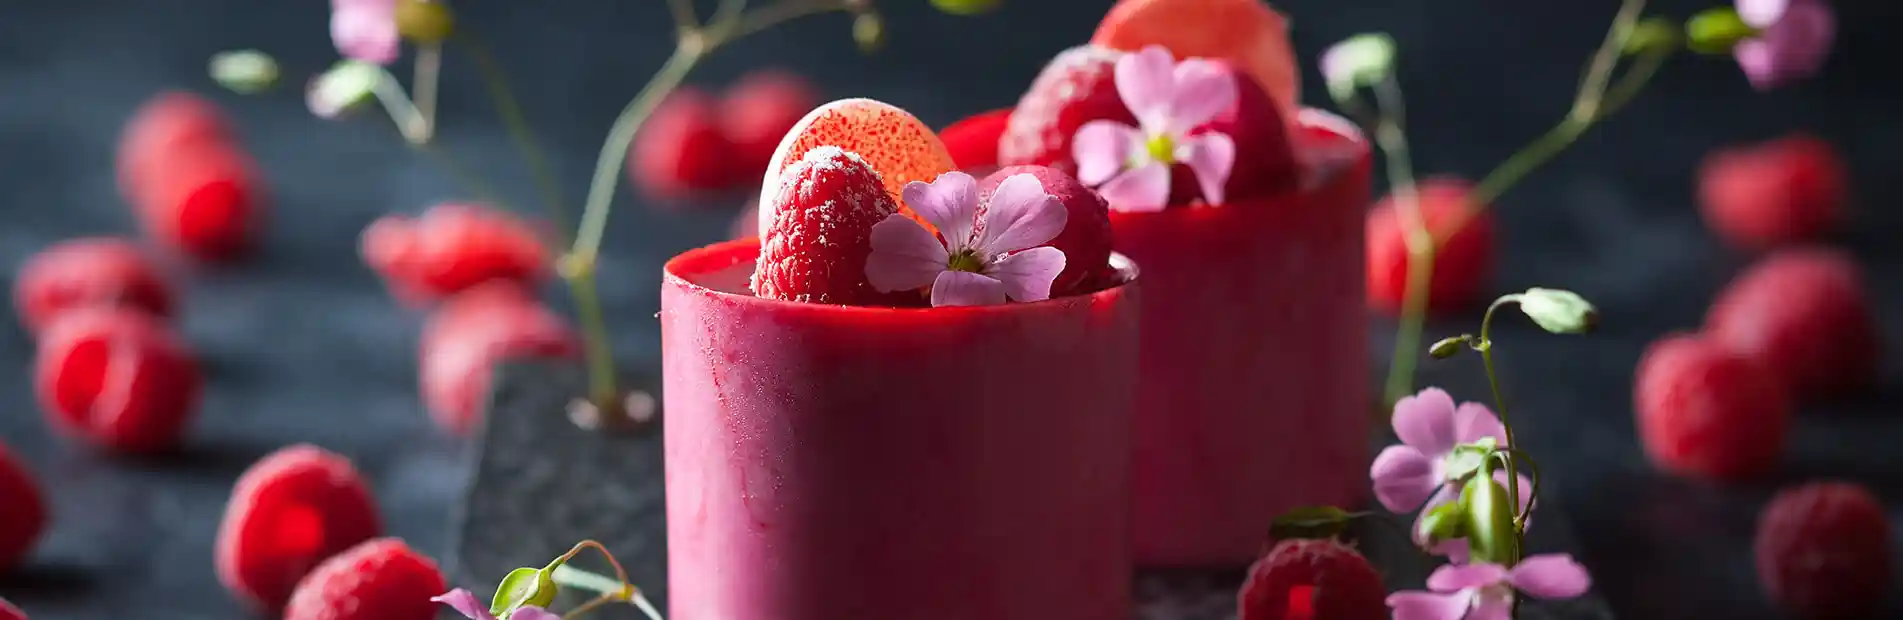 A refreshing raspberry beverage served in a tall glass with ice cubes, showcasing vibrant red hues and garnished with fresh raspberries on the rim